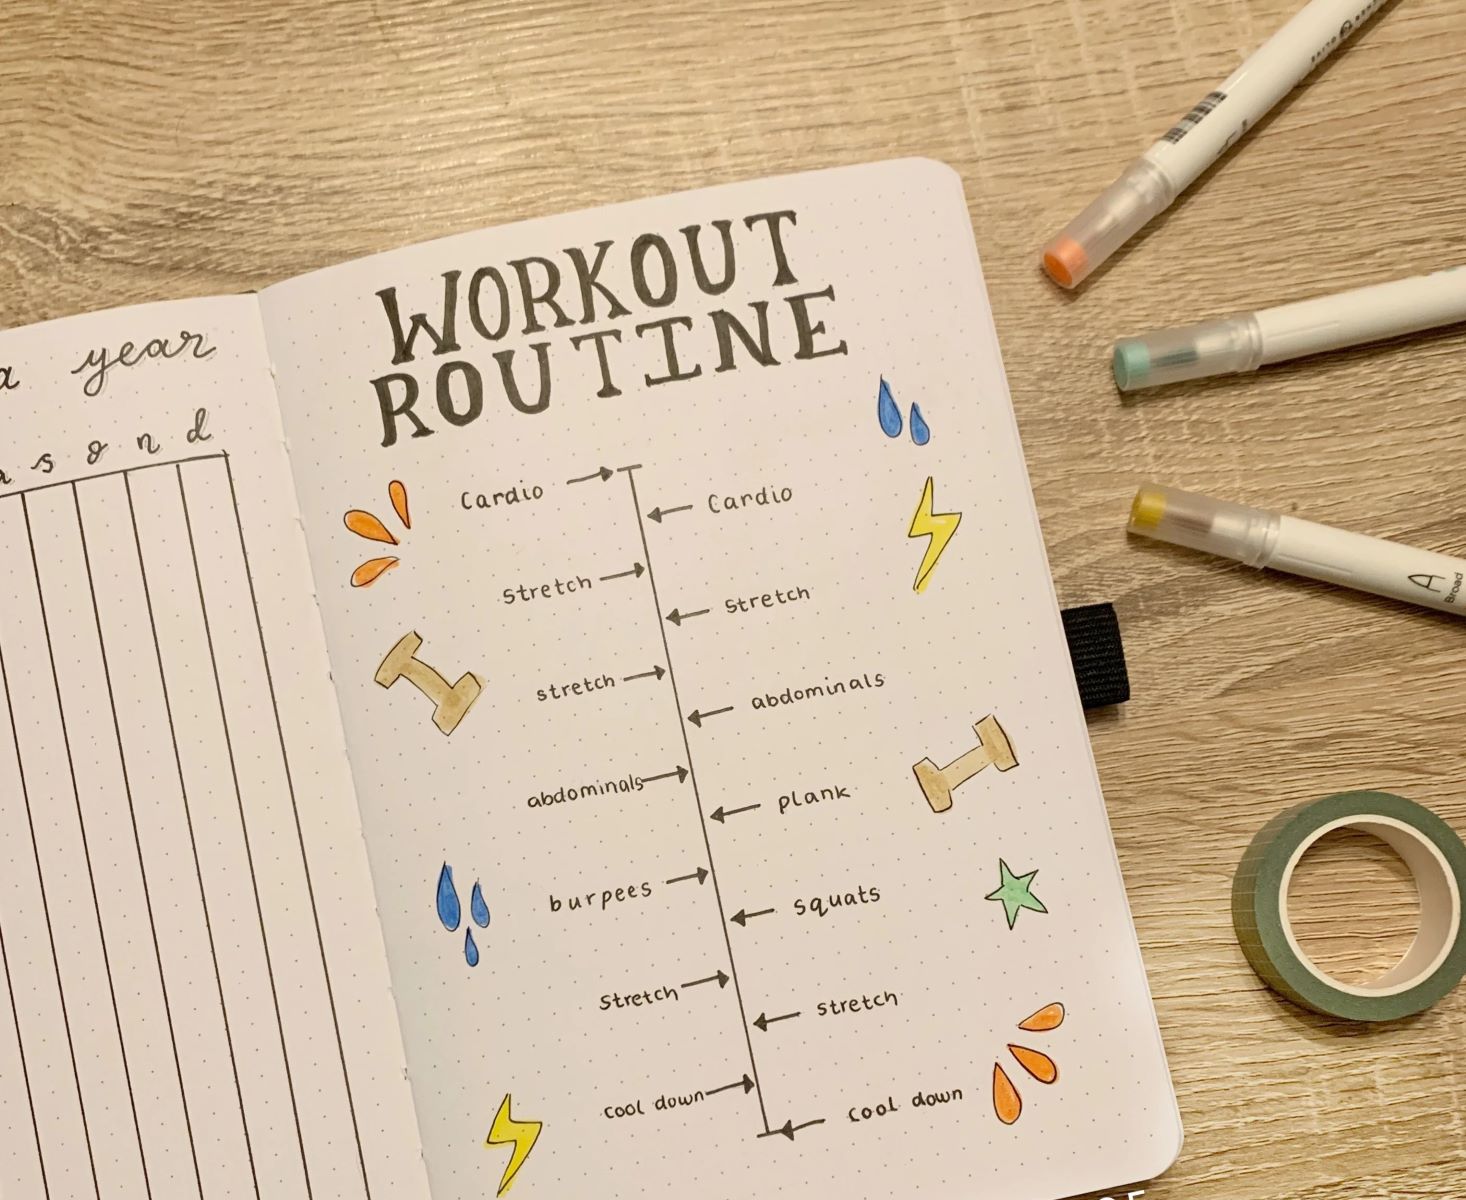 How To Make Workout Routine